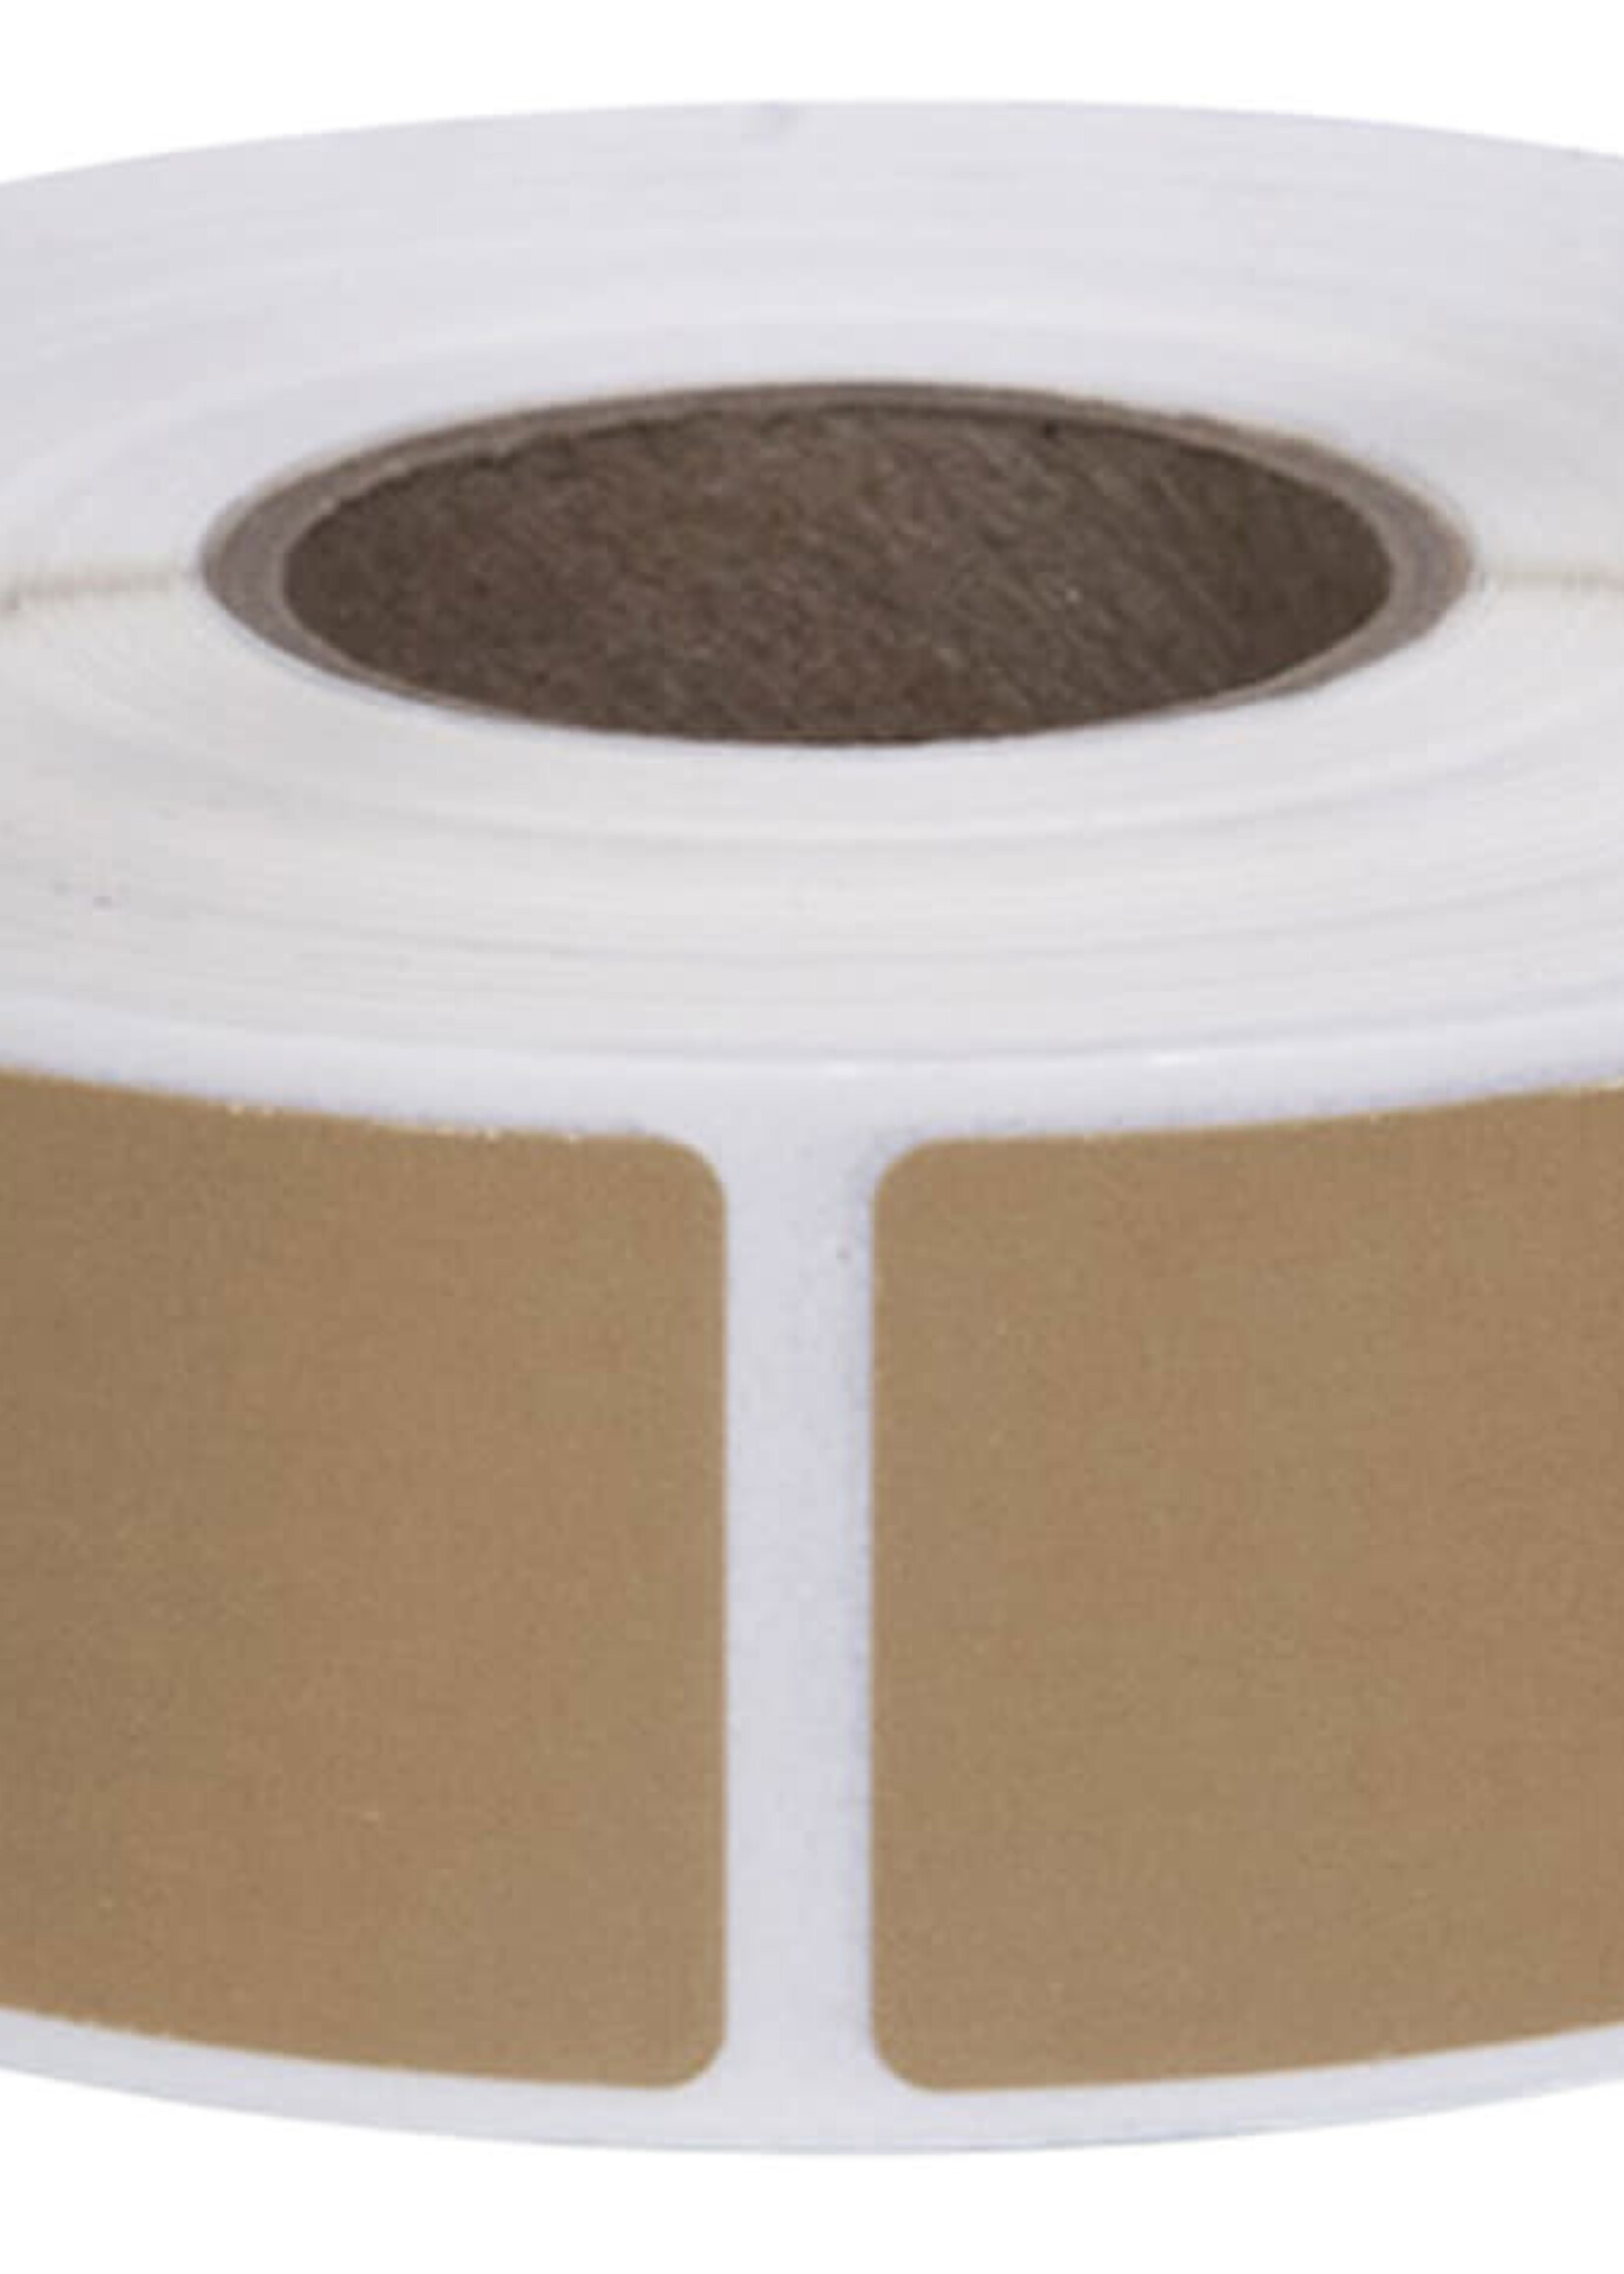 Action ACTION TARGET INC PASTBR Square Target Pasters 7/8" 1000 Per Roll Brown